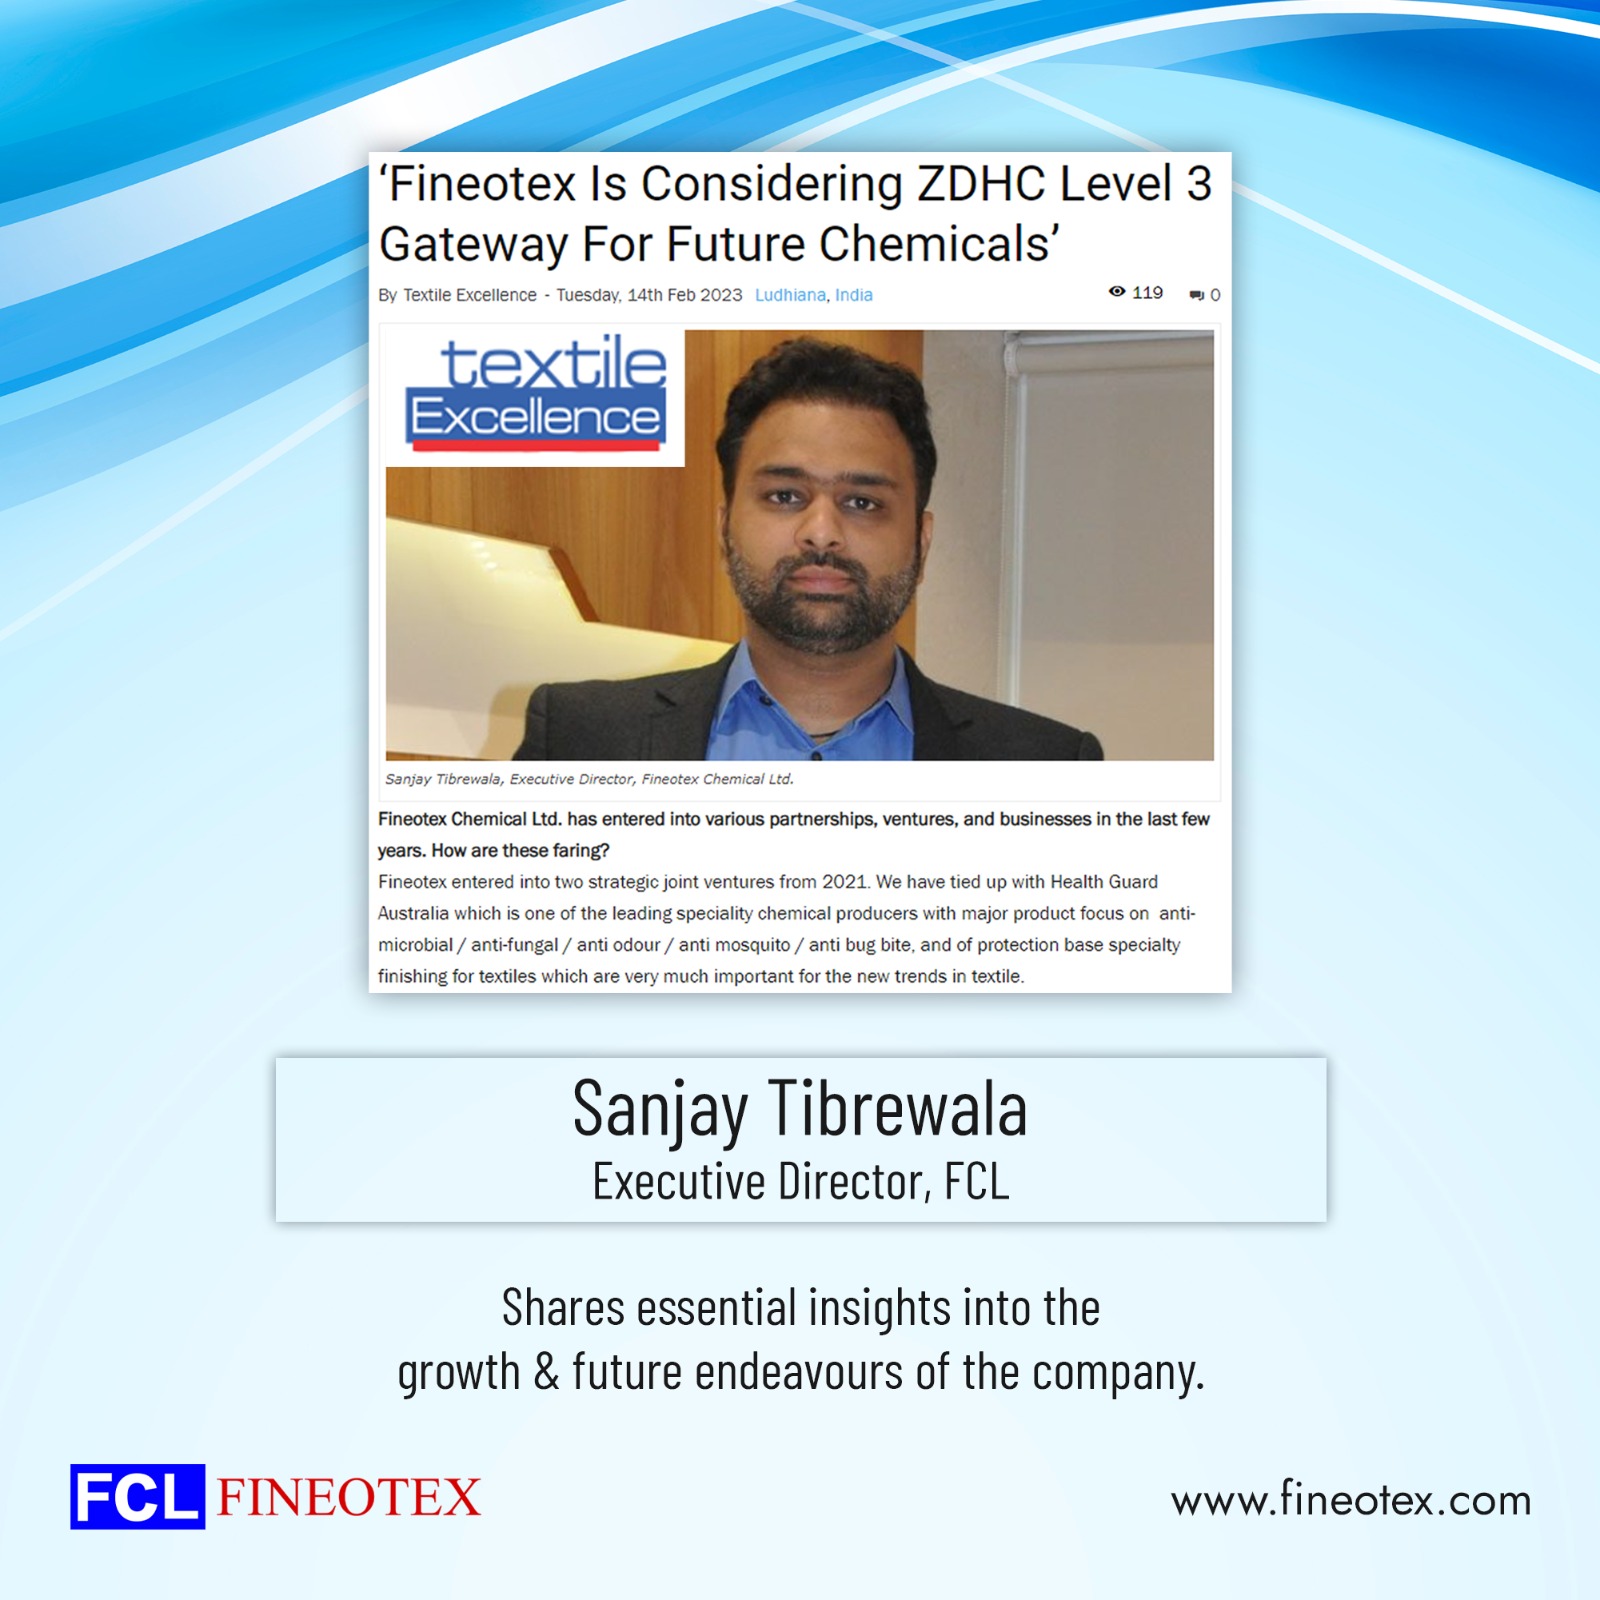 Mr Sanjay Tibrewala discusses the textile industry’s pressing need to focus on sustainable chemistry.